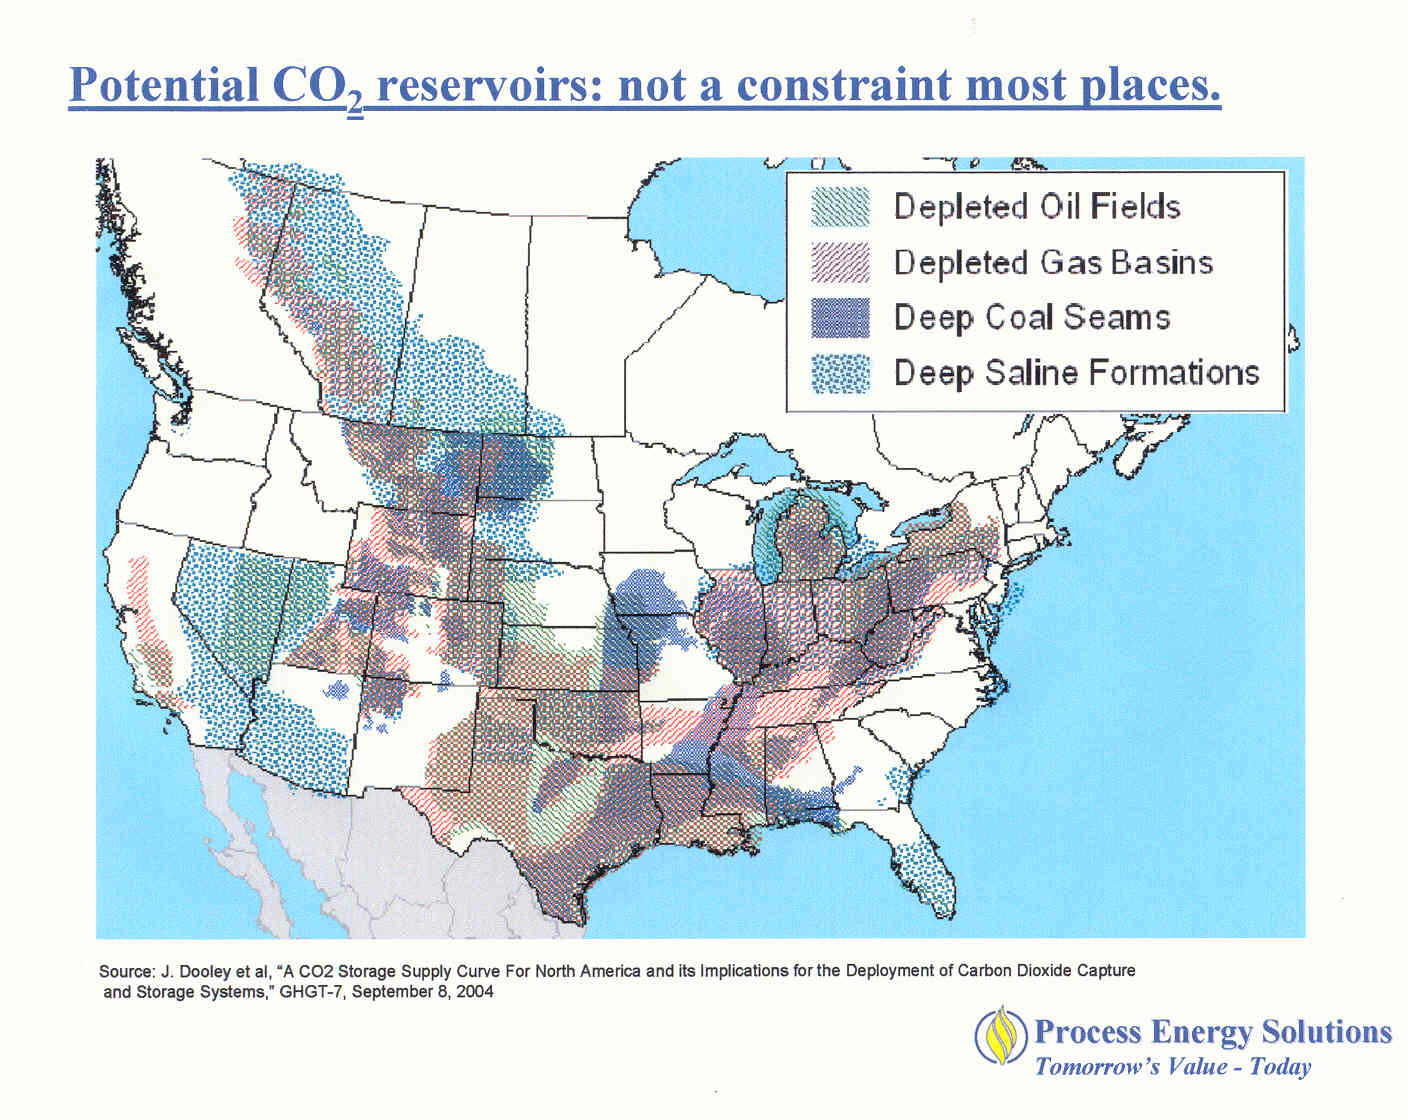 sequestration-potential-co2-reservoirs.jpg